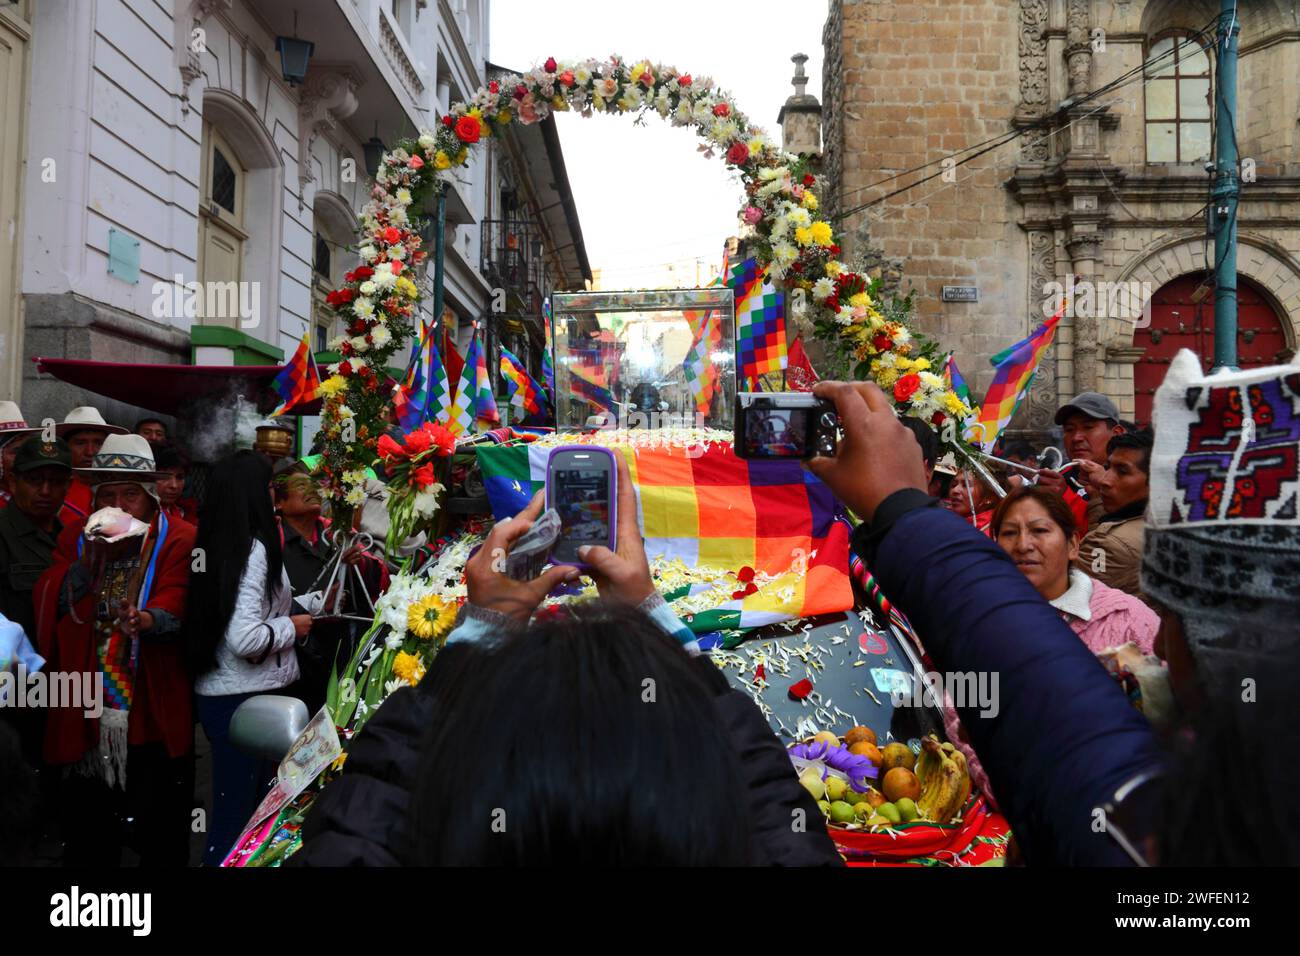 La Paz, BOLIVIA; 24th January 2015. People take photos with their smartphones of an ancient illa (or statue) of an Ekeko (an Aymara god of abundance) as it is paraded through the streets of La Paz to celebrate its first appearance at the Alasitas festival, which starts today. The statue is around 2000 years old and was made by the Pucara culture. It was taken from the archaeological site of Tiwanaku to Switzerland in 1858, and returned to Bolivia by the Berne History Museum in November 2014. On the right is part of San Francisco church. Stock Photo